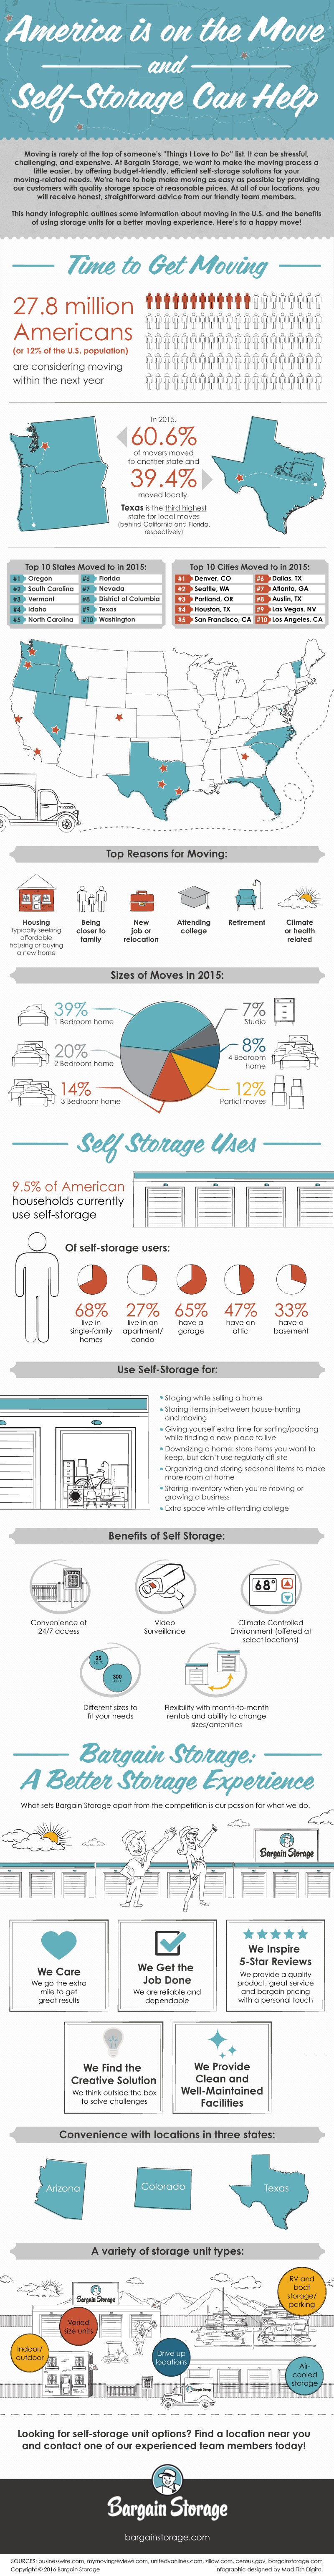 America on the Move and Self Storage can Help Infographic